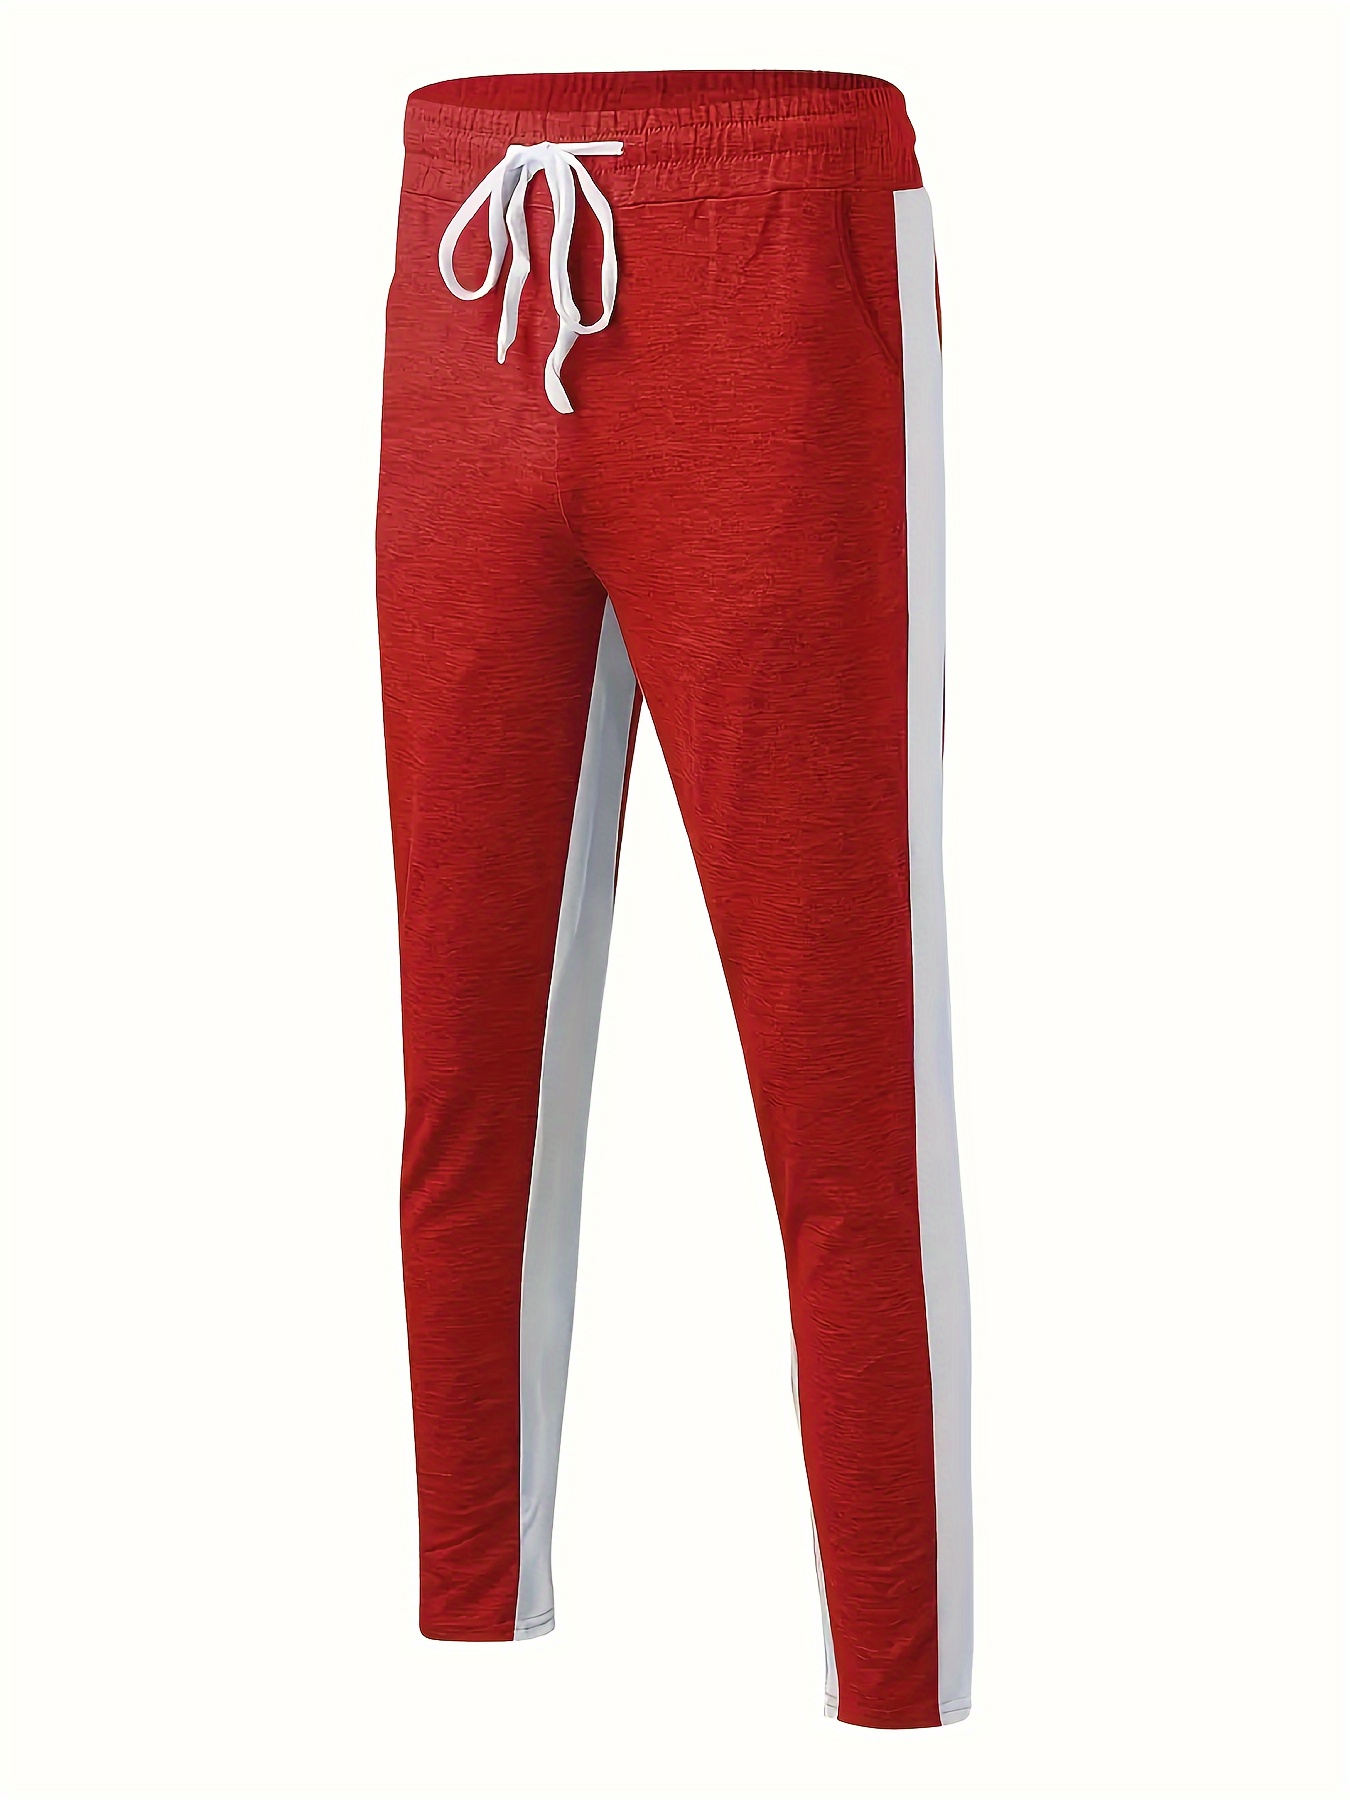  Women's Casual Pants with Pockets Solid Color Trousers Sweatpants  Joggers Drawstring Elastic Waisted Workout Pants (Red #1, M) : Sports &  Outdoors